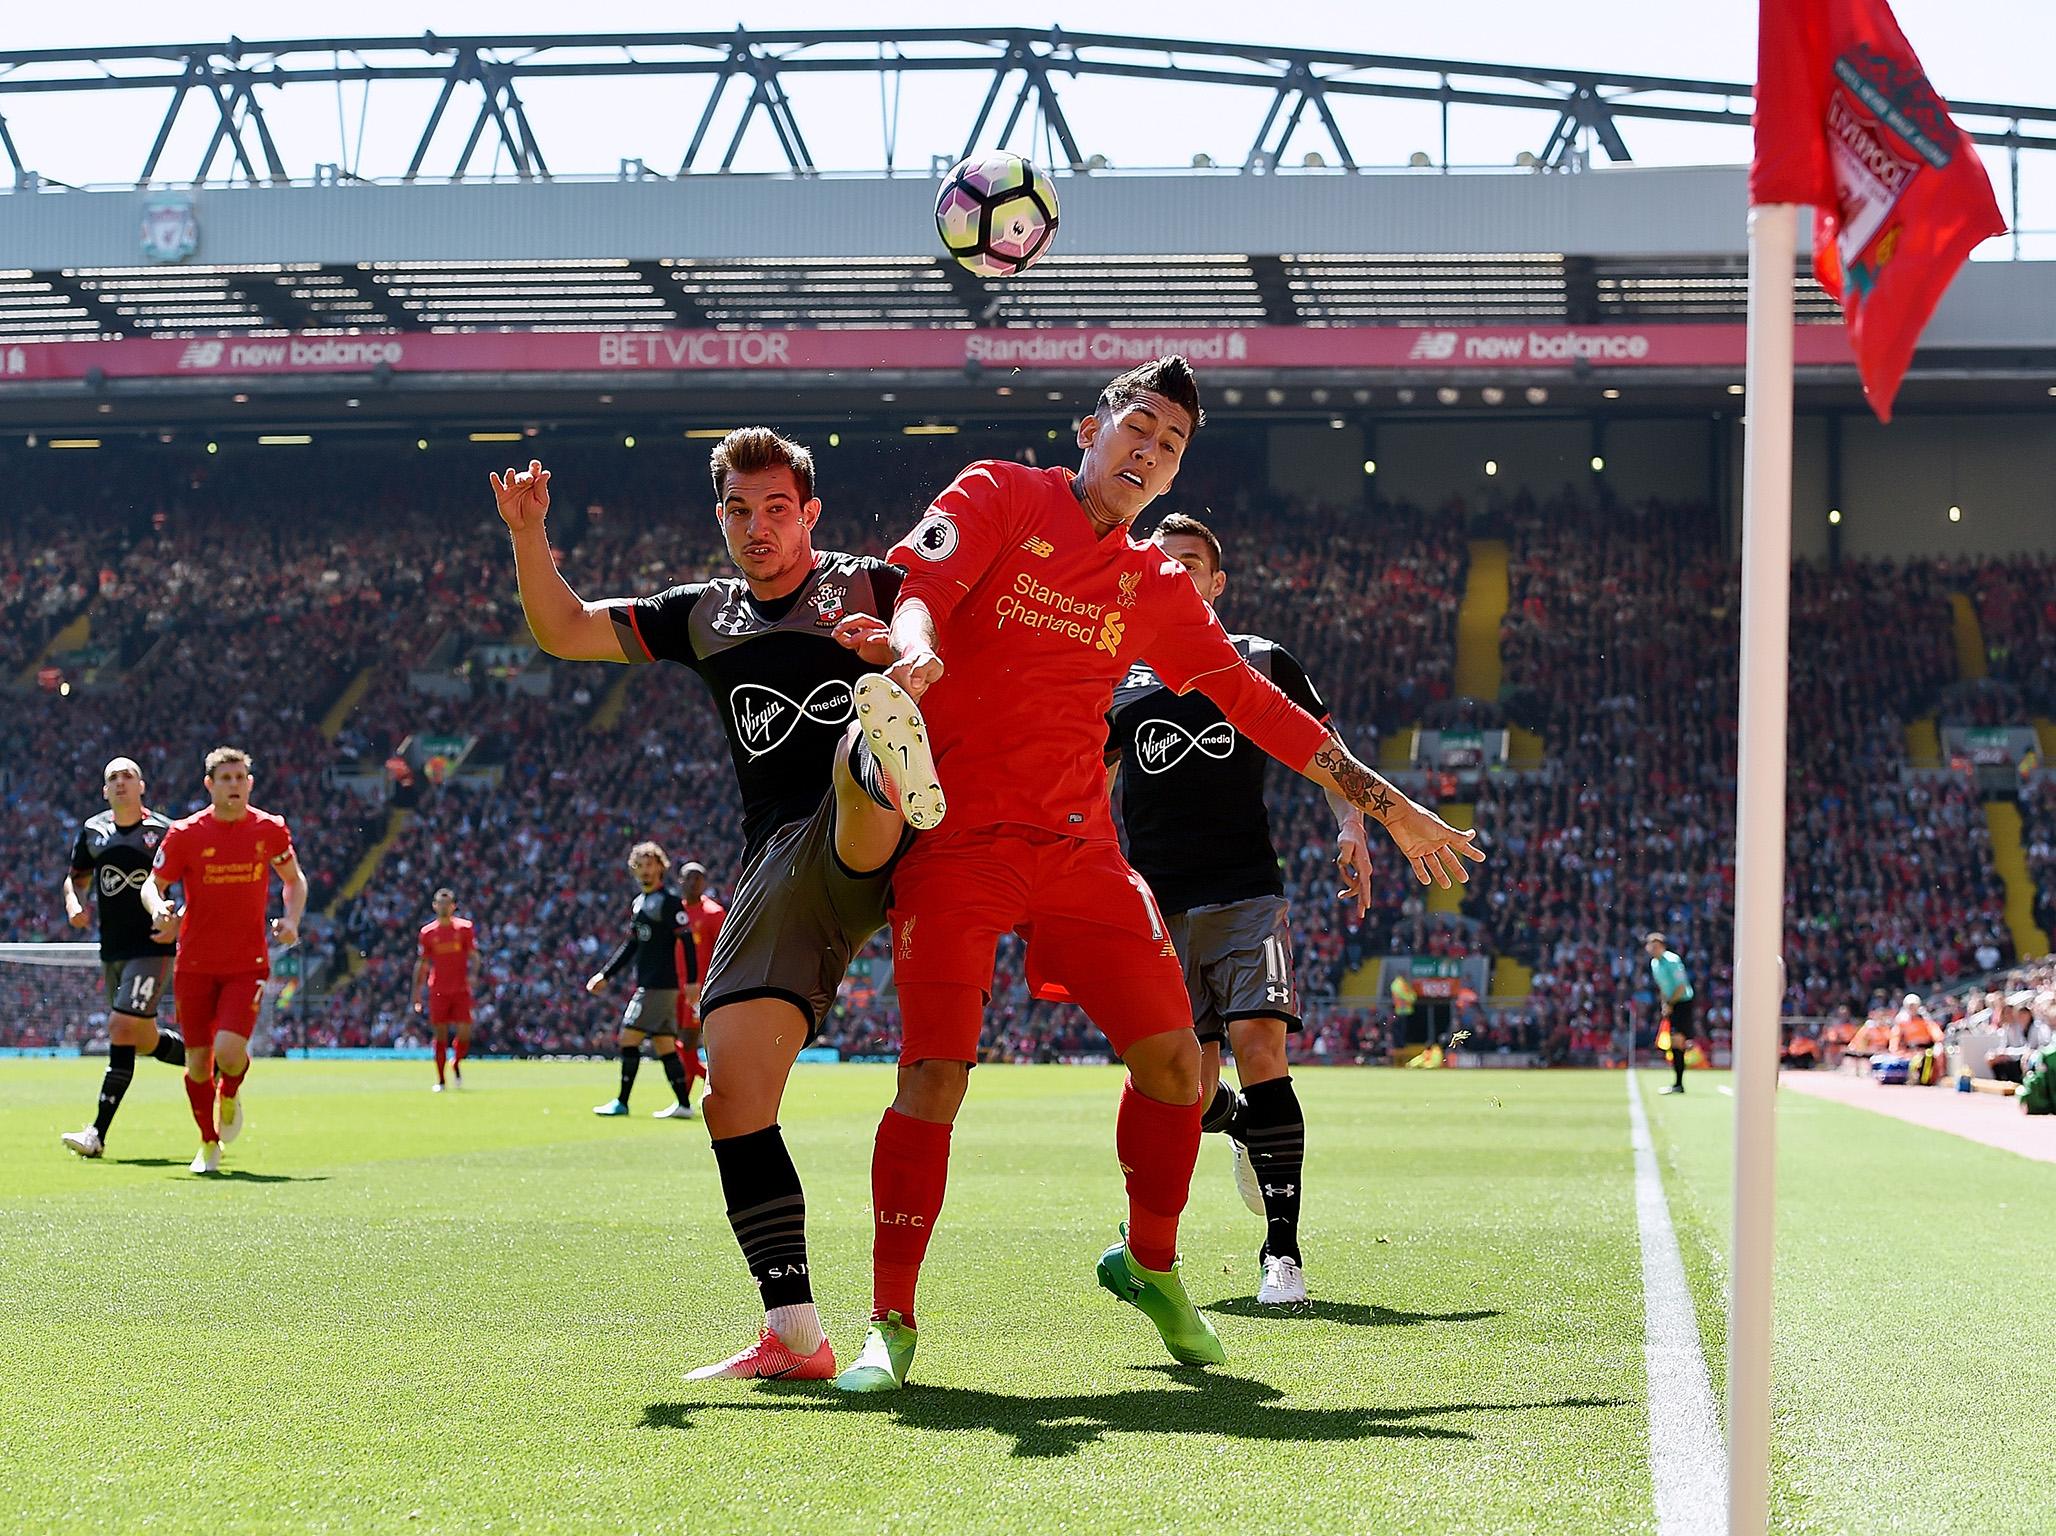 Liverpool vs Southampton, Premier League: what time does it start, where can I watch it and what are the odds?